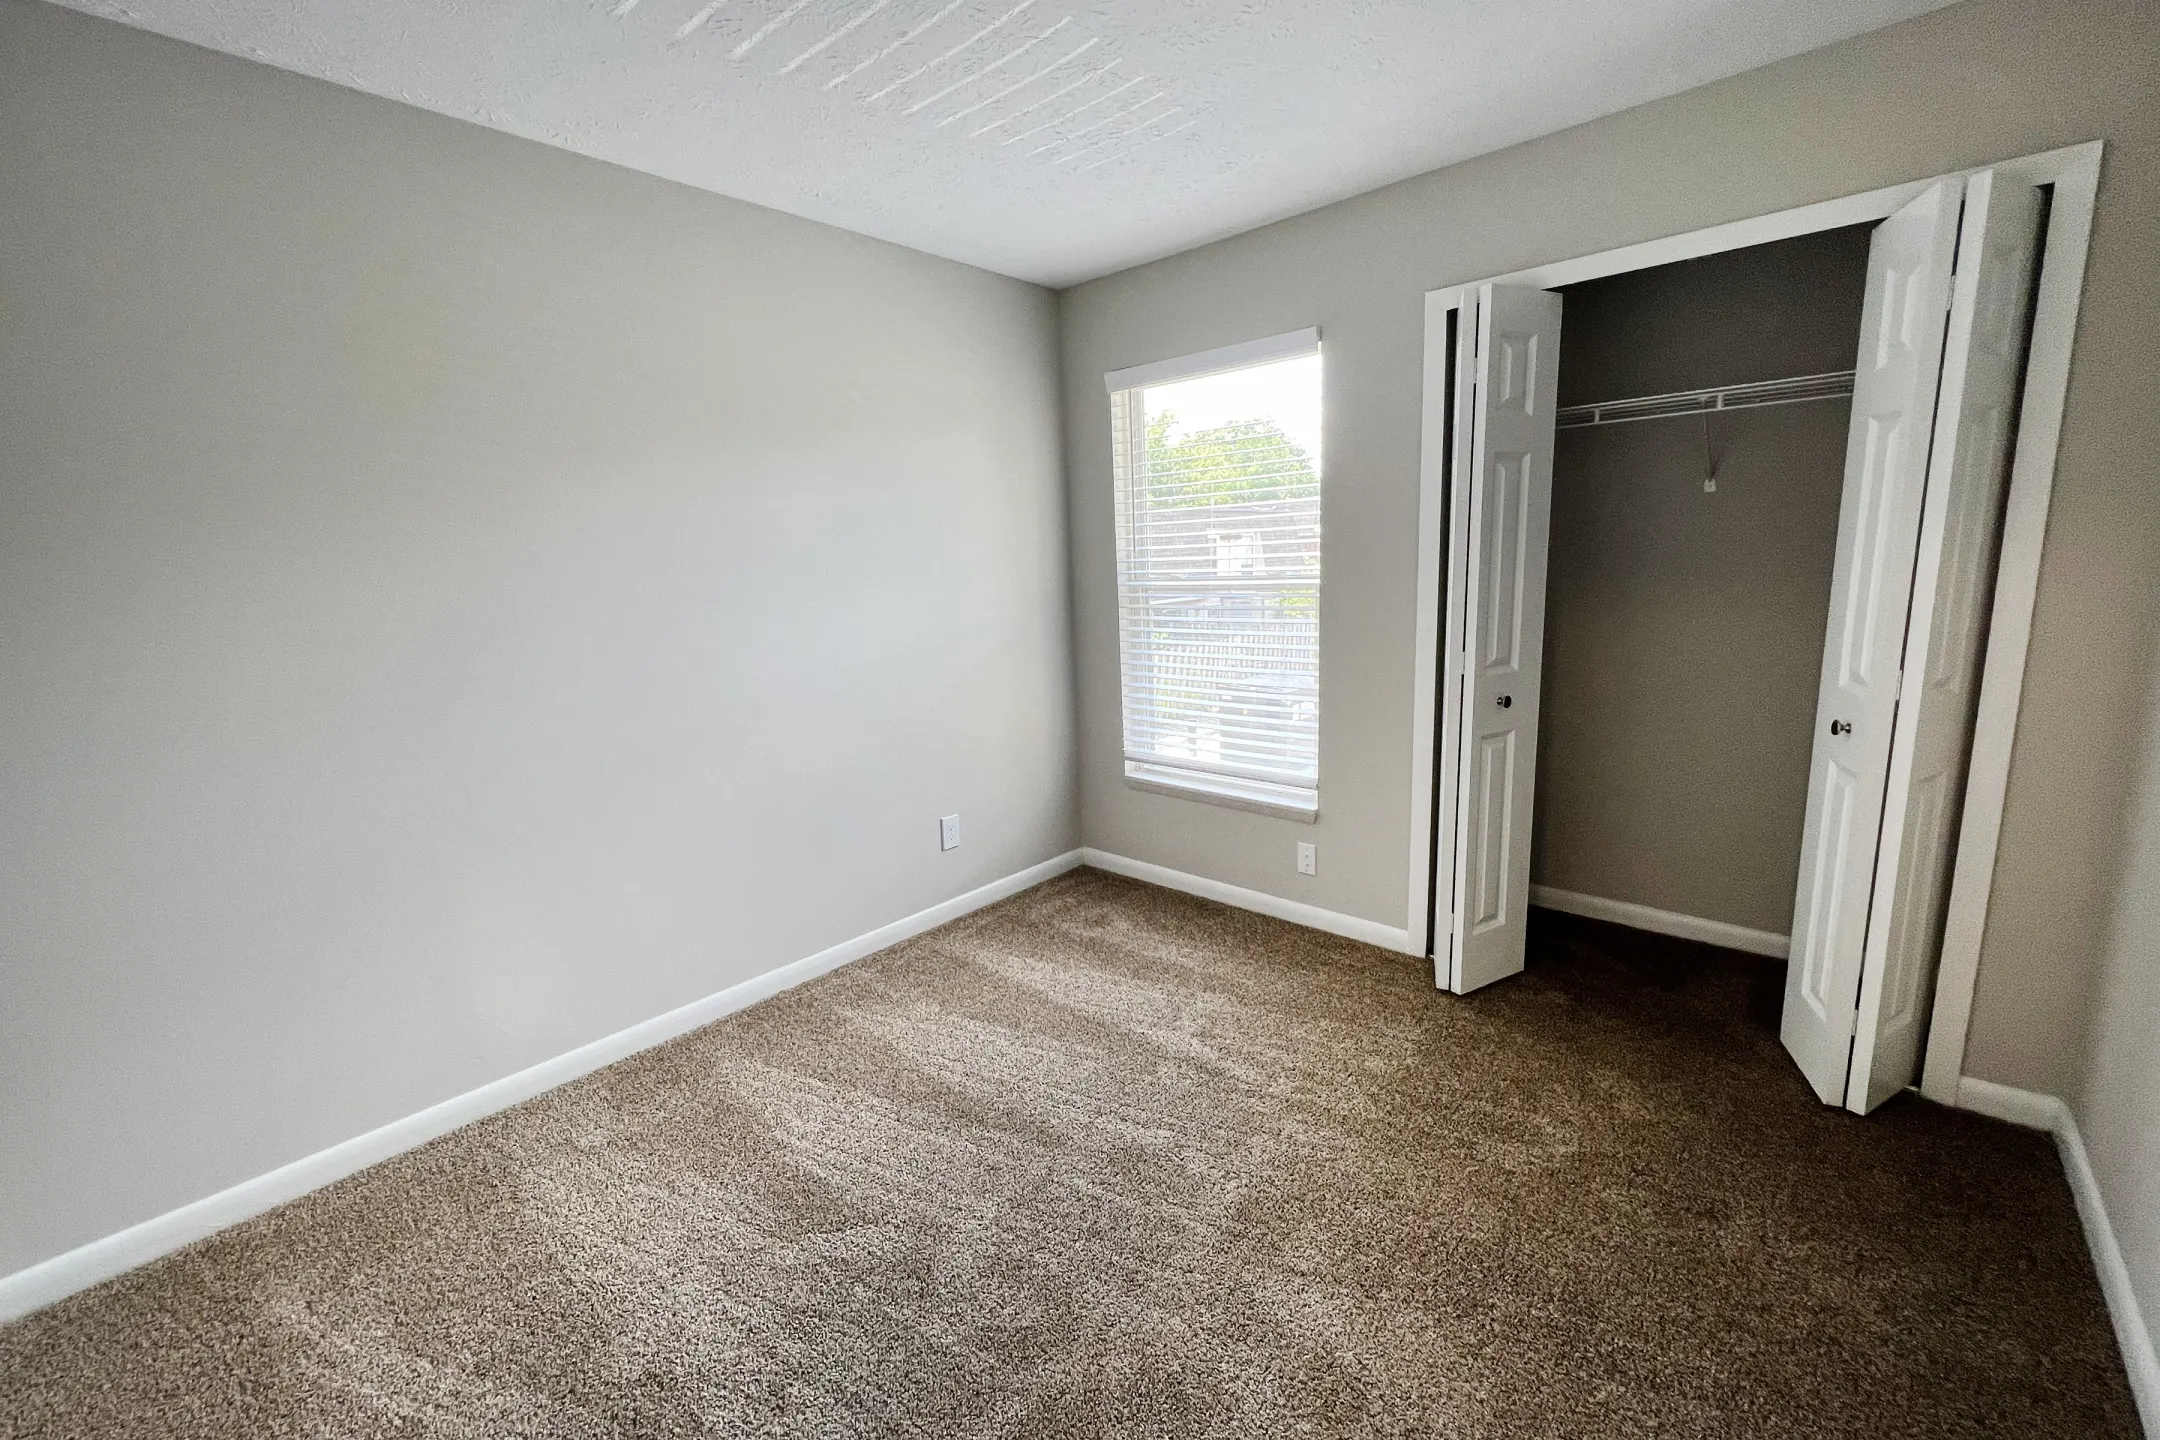 Bedroom - Miamisburg By The Mall - Miamisburg, OH